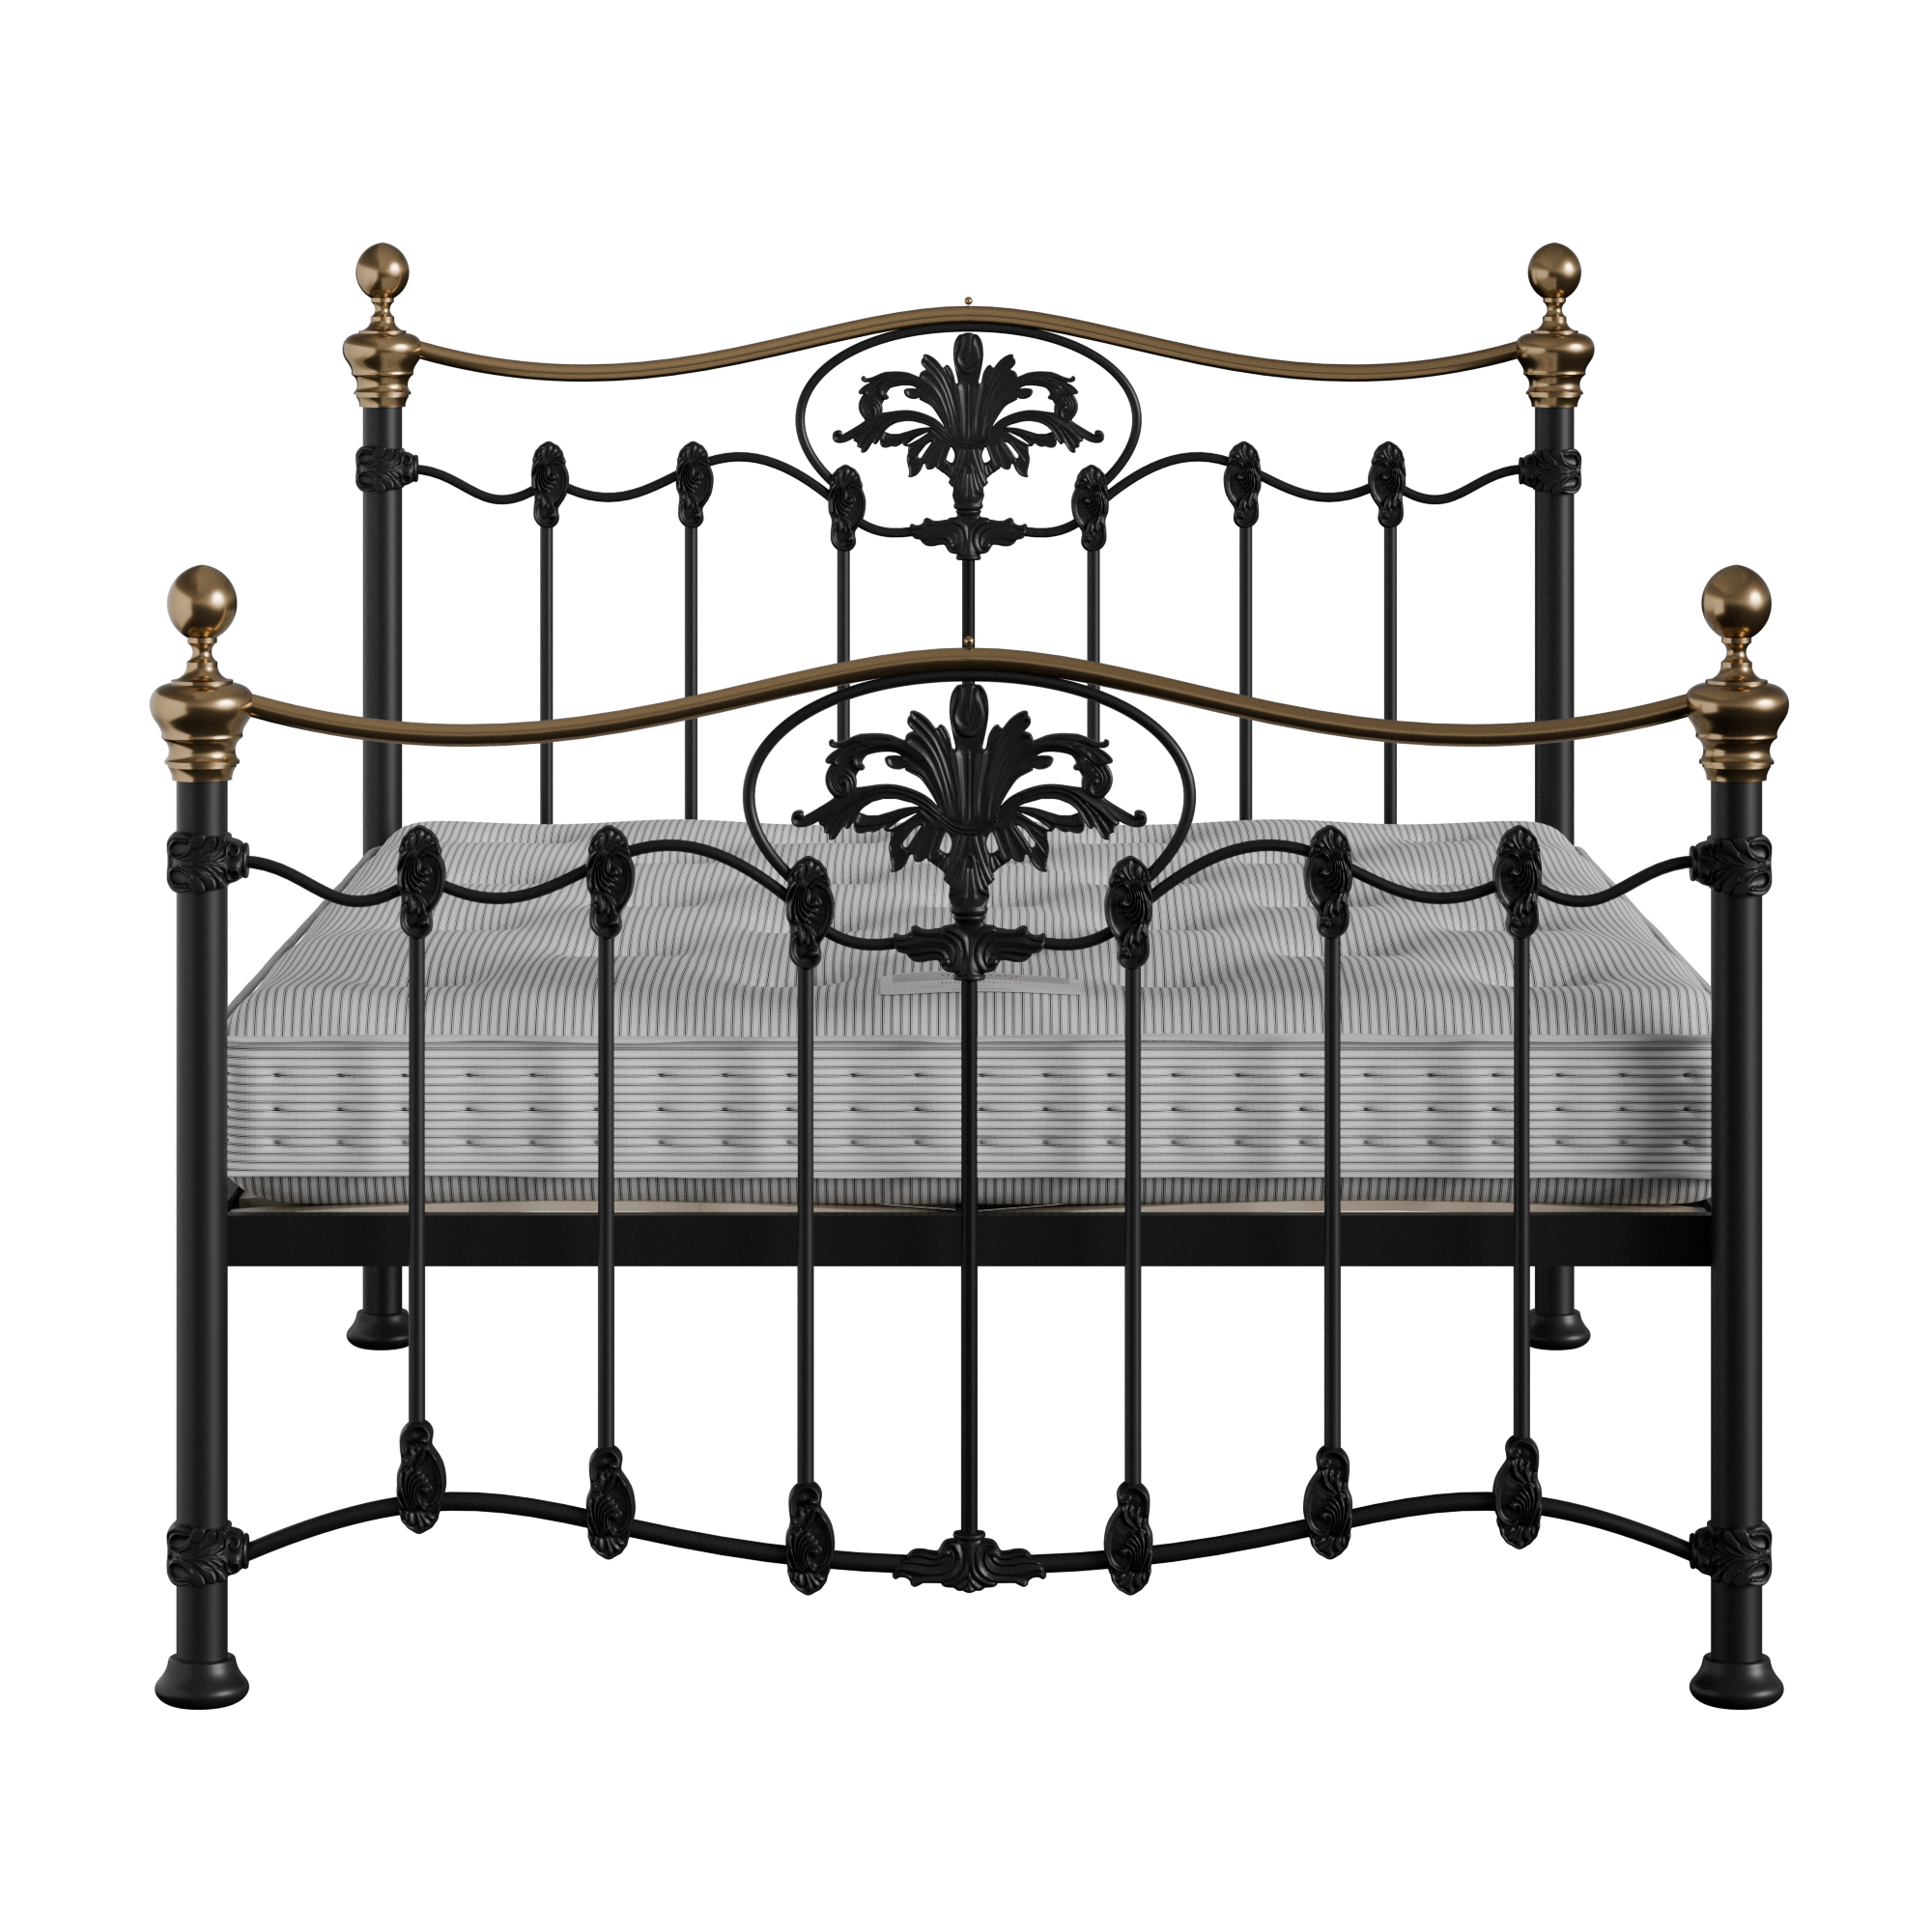 Camolin iron/metal bed in black with Juno mattress